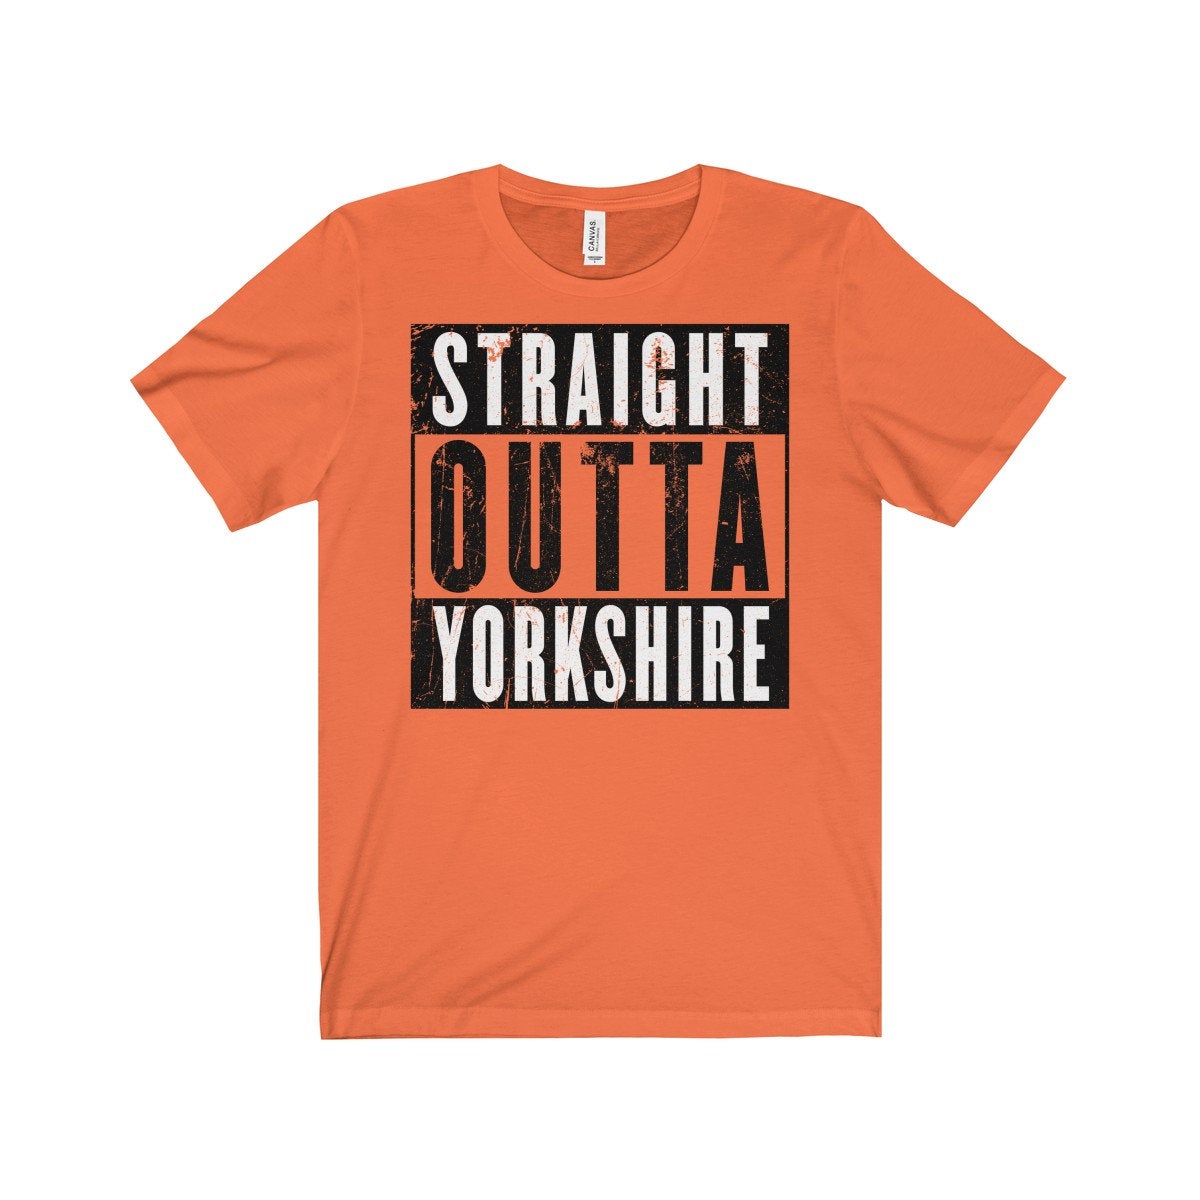 Straight Outta Yorkshire Funny Compton NWA Style Unisex Jersey Short Sleeve Tee